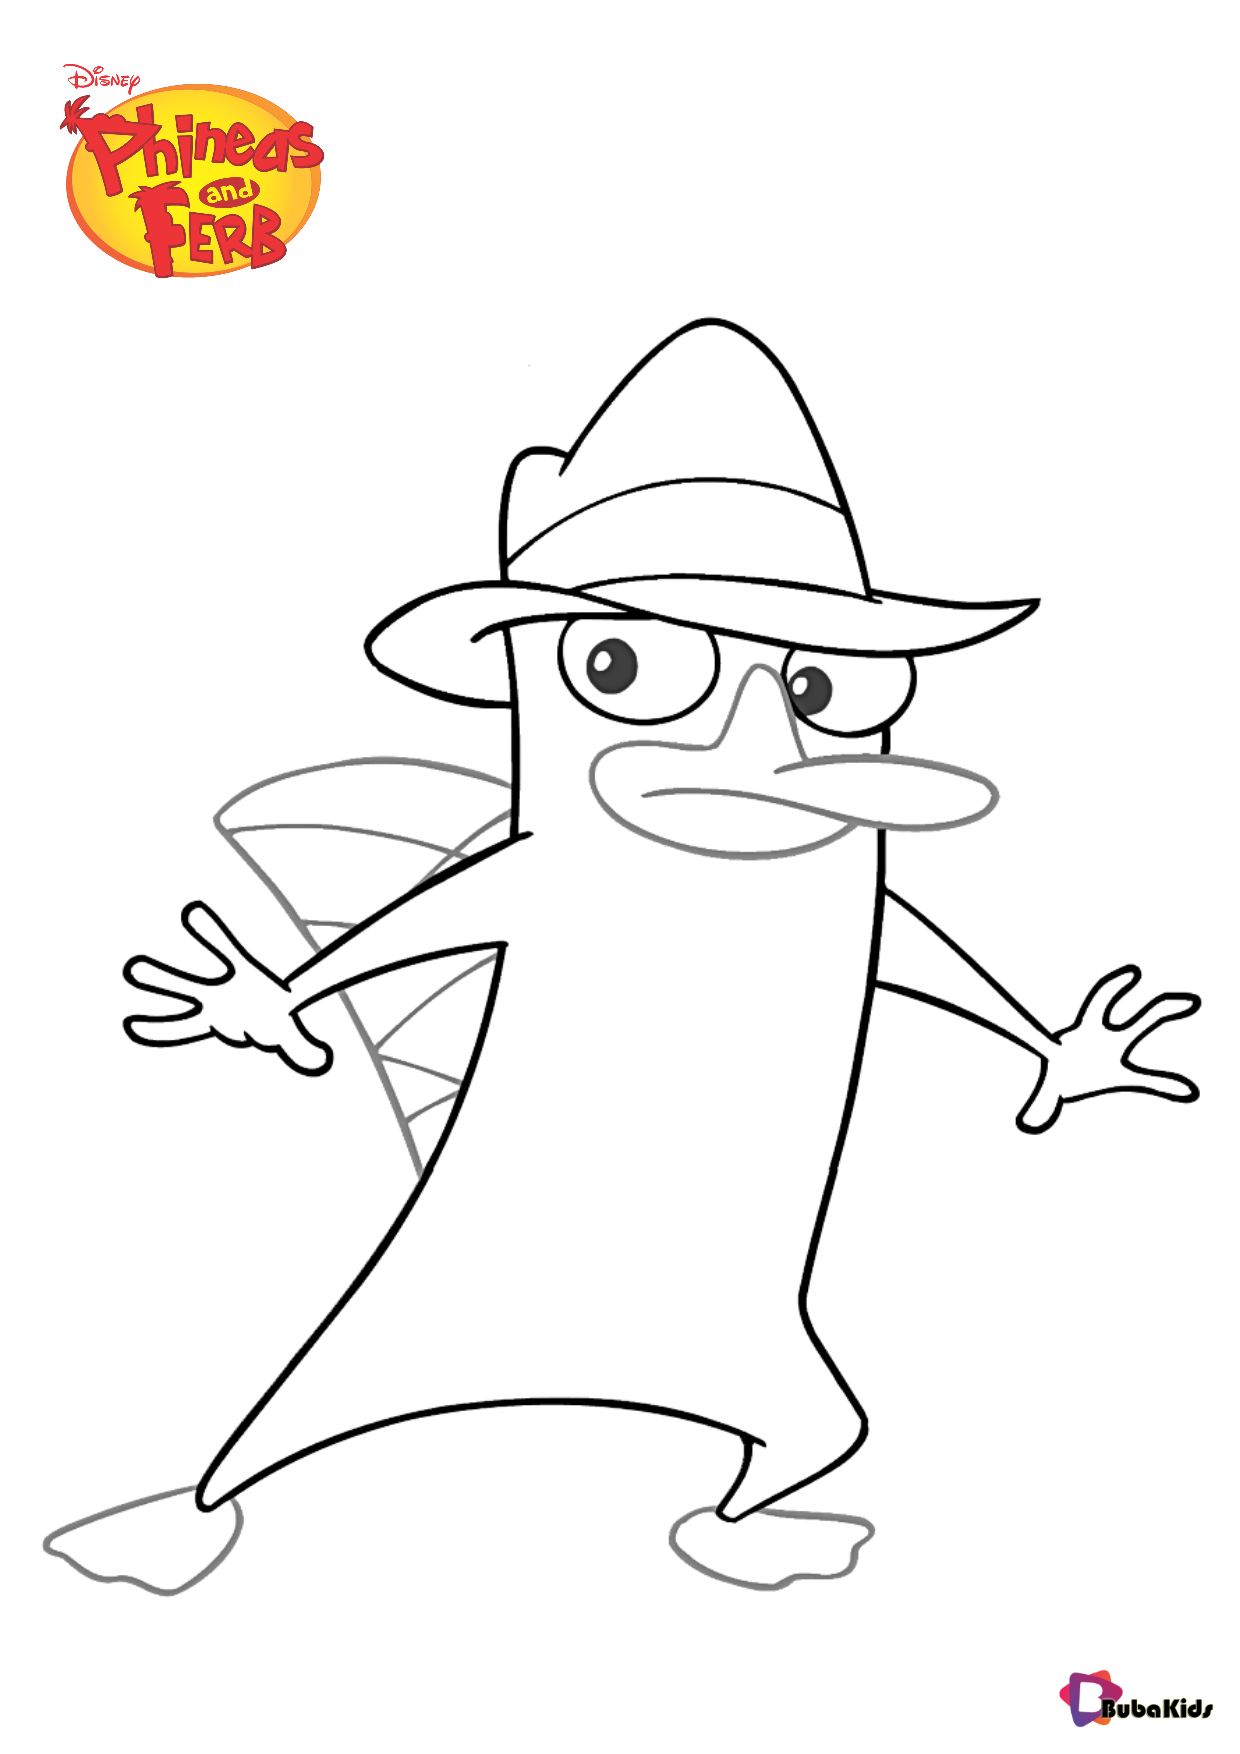 Perry the Platypus coloring page Phineas and Ferb Wallpaper